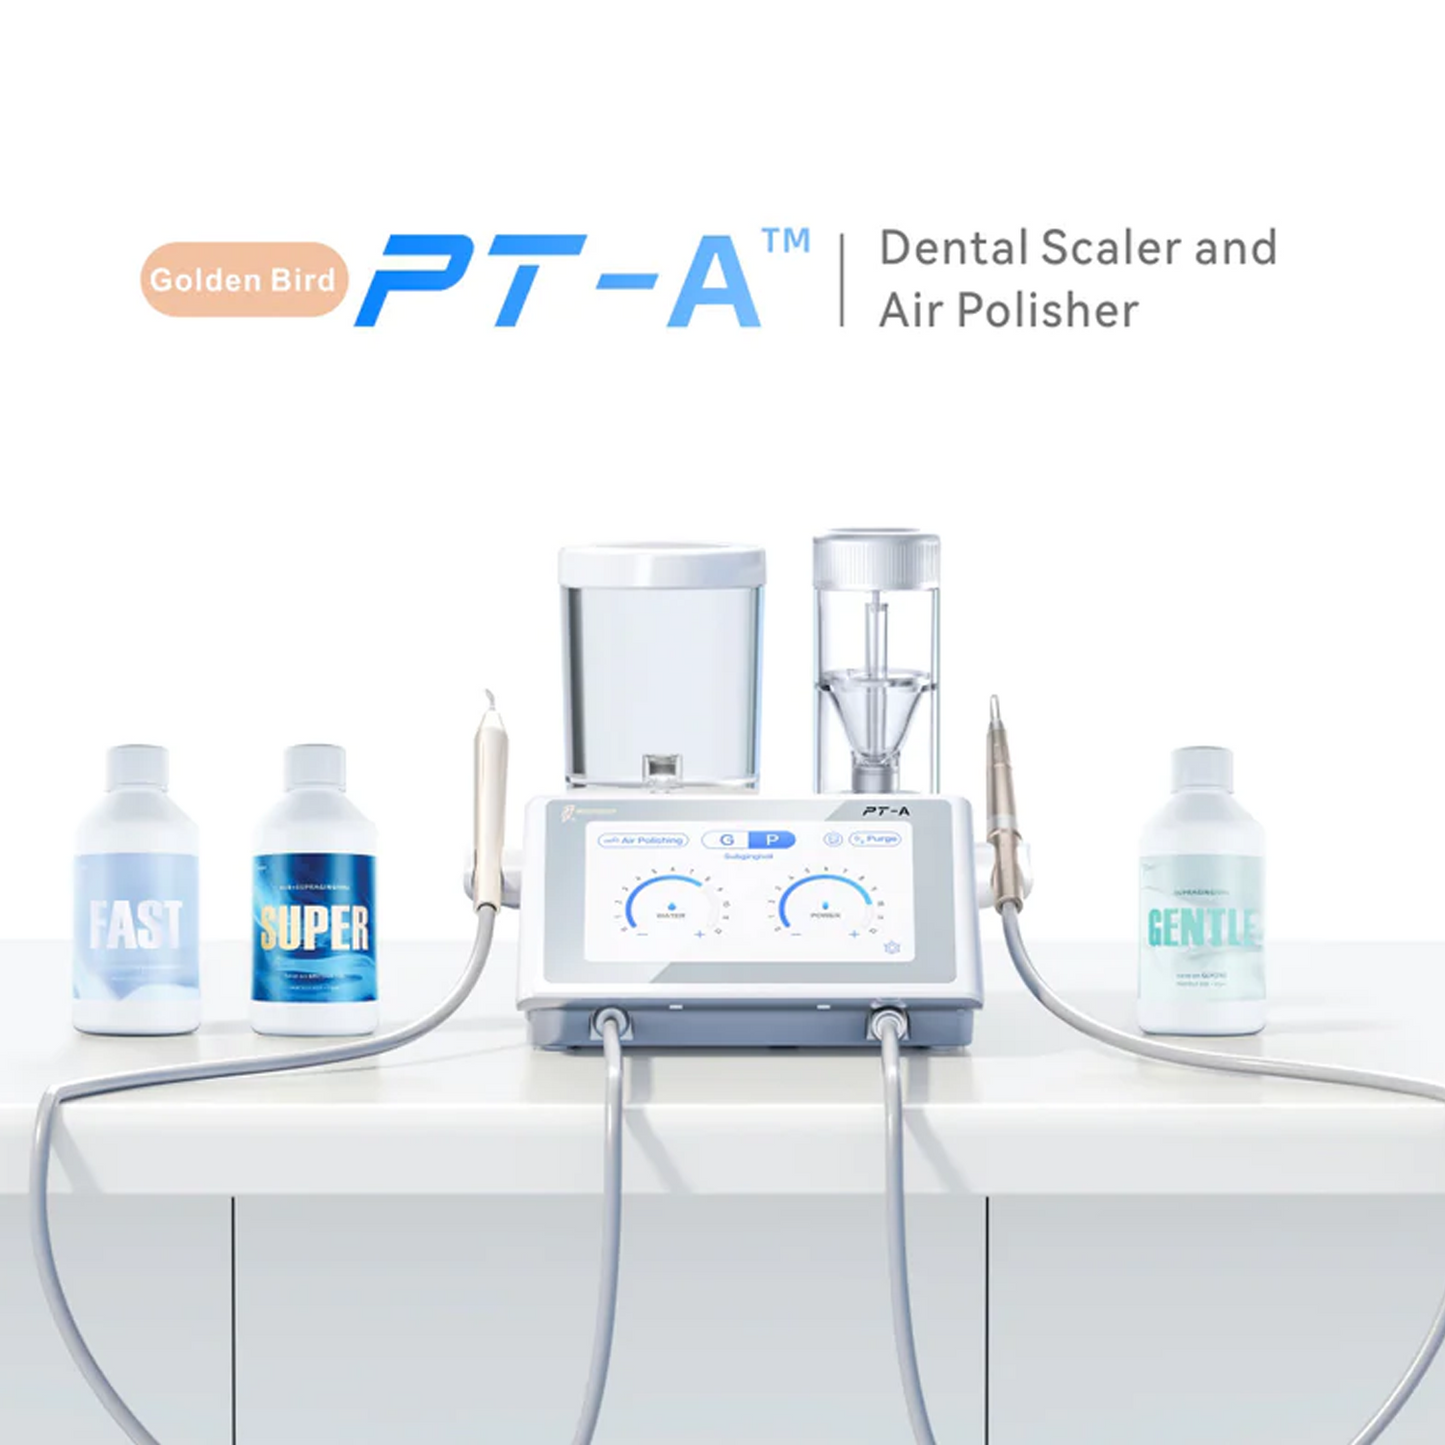 Dental Scaler and Air Polisher PT- A